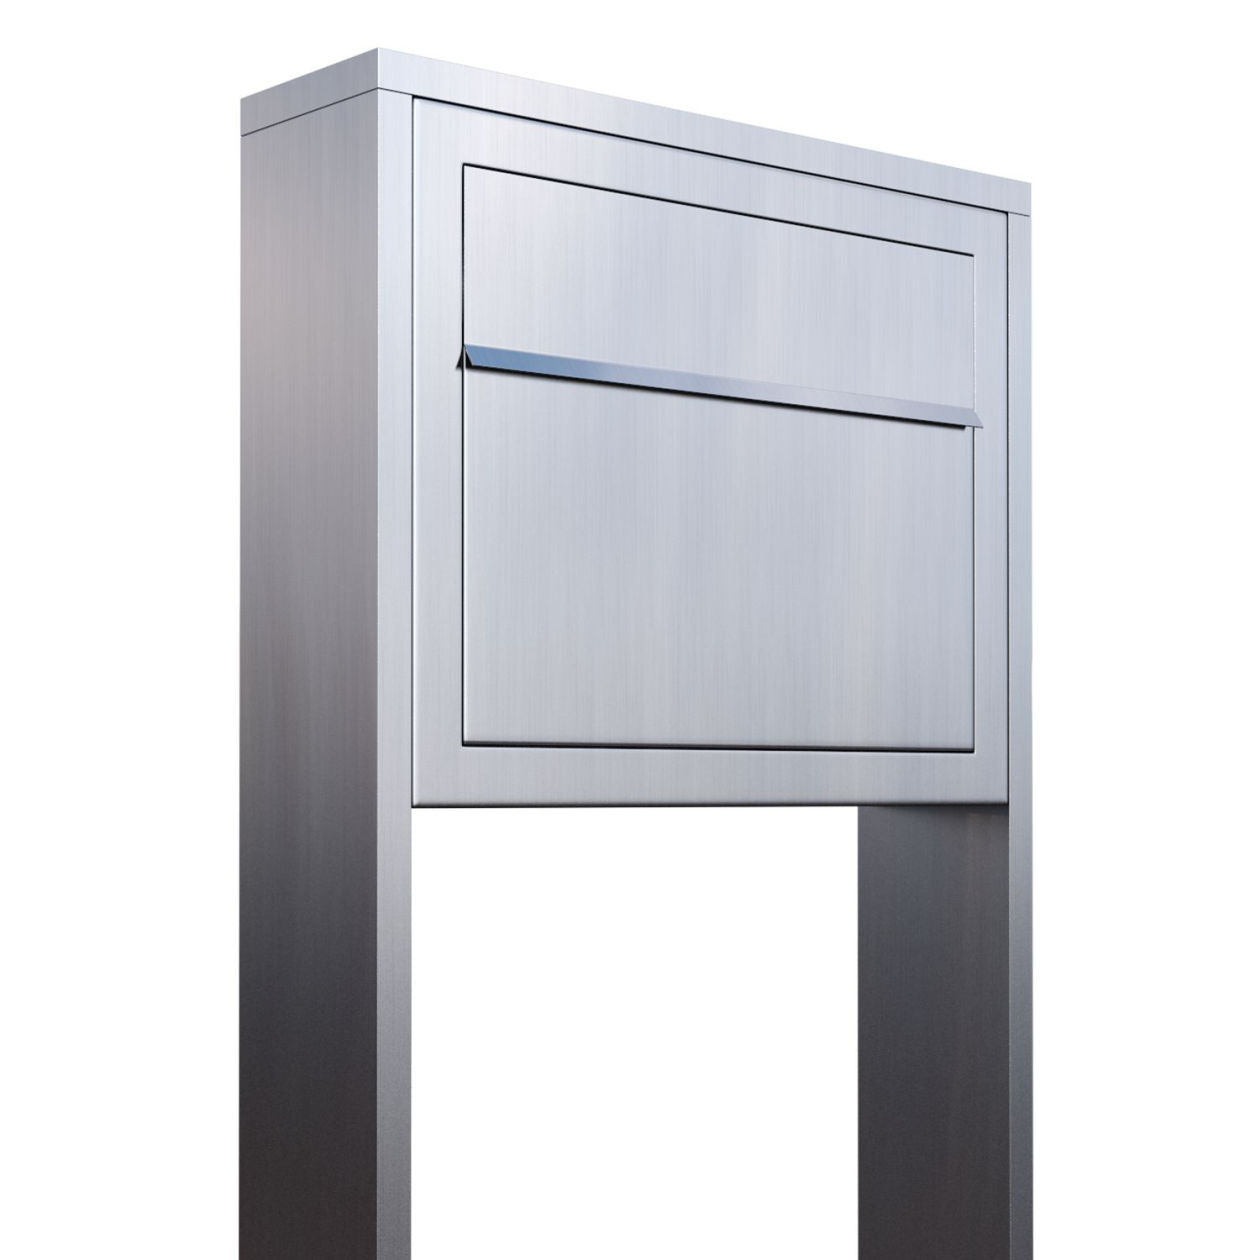 STAND ELEGANCE by Bravios - Modern post-mounted stainless steel mailbo